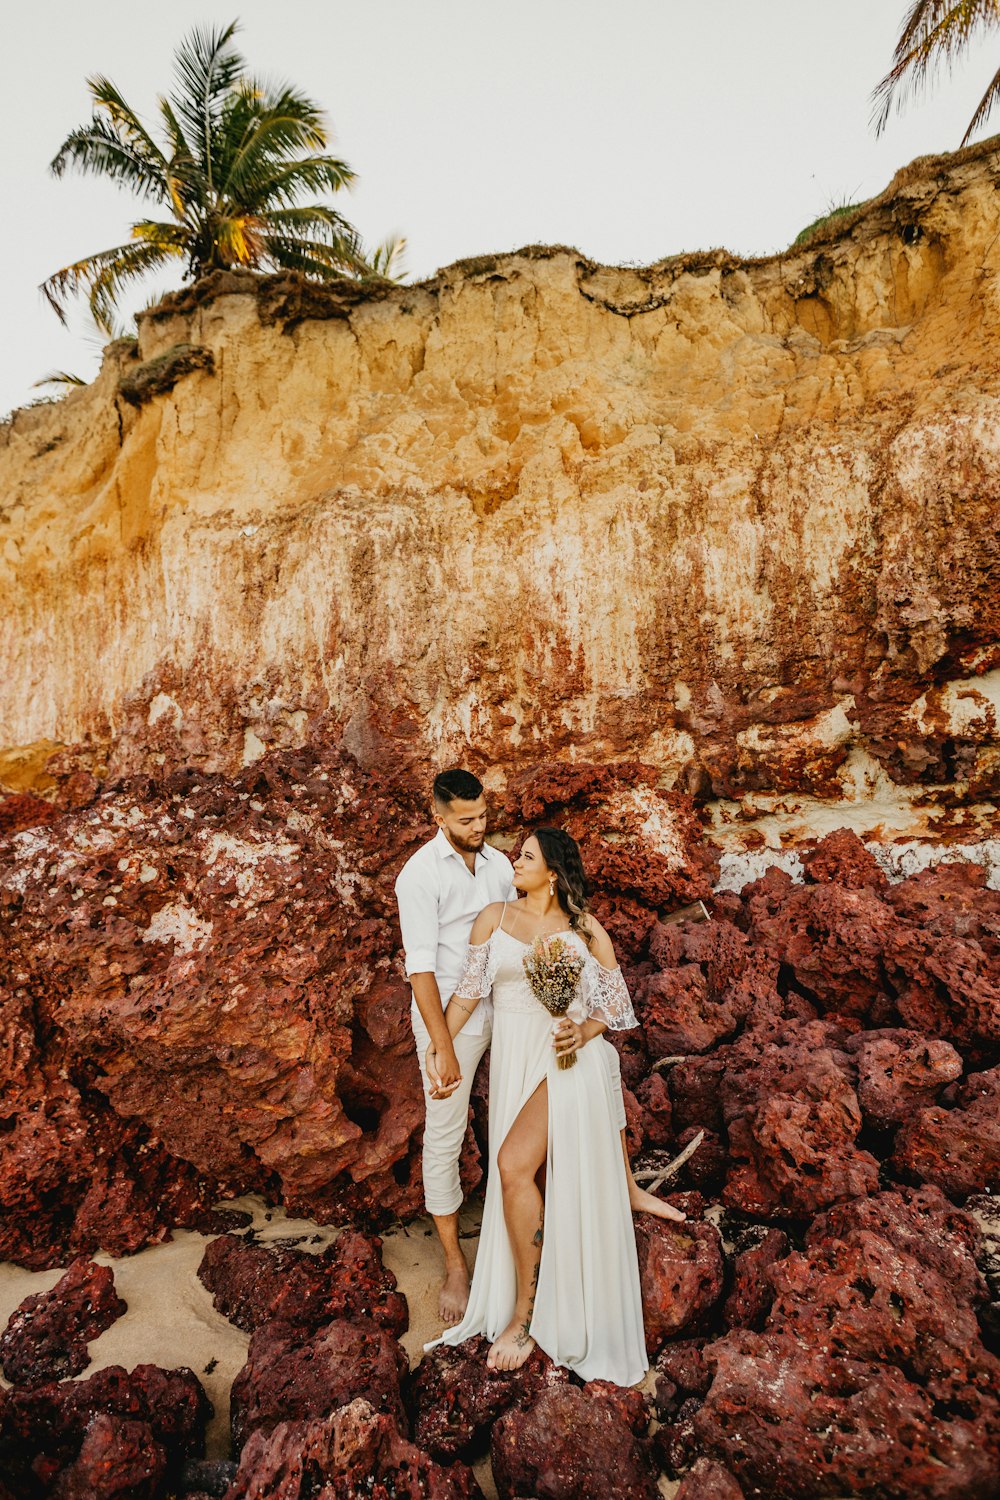 man and woman in white wedding dress standing in front of brown rock formation during daytime